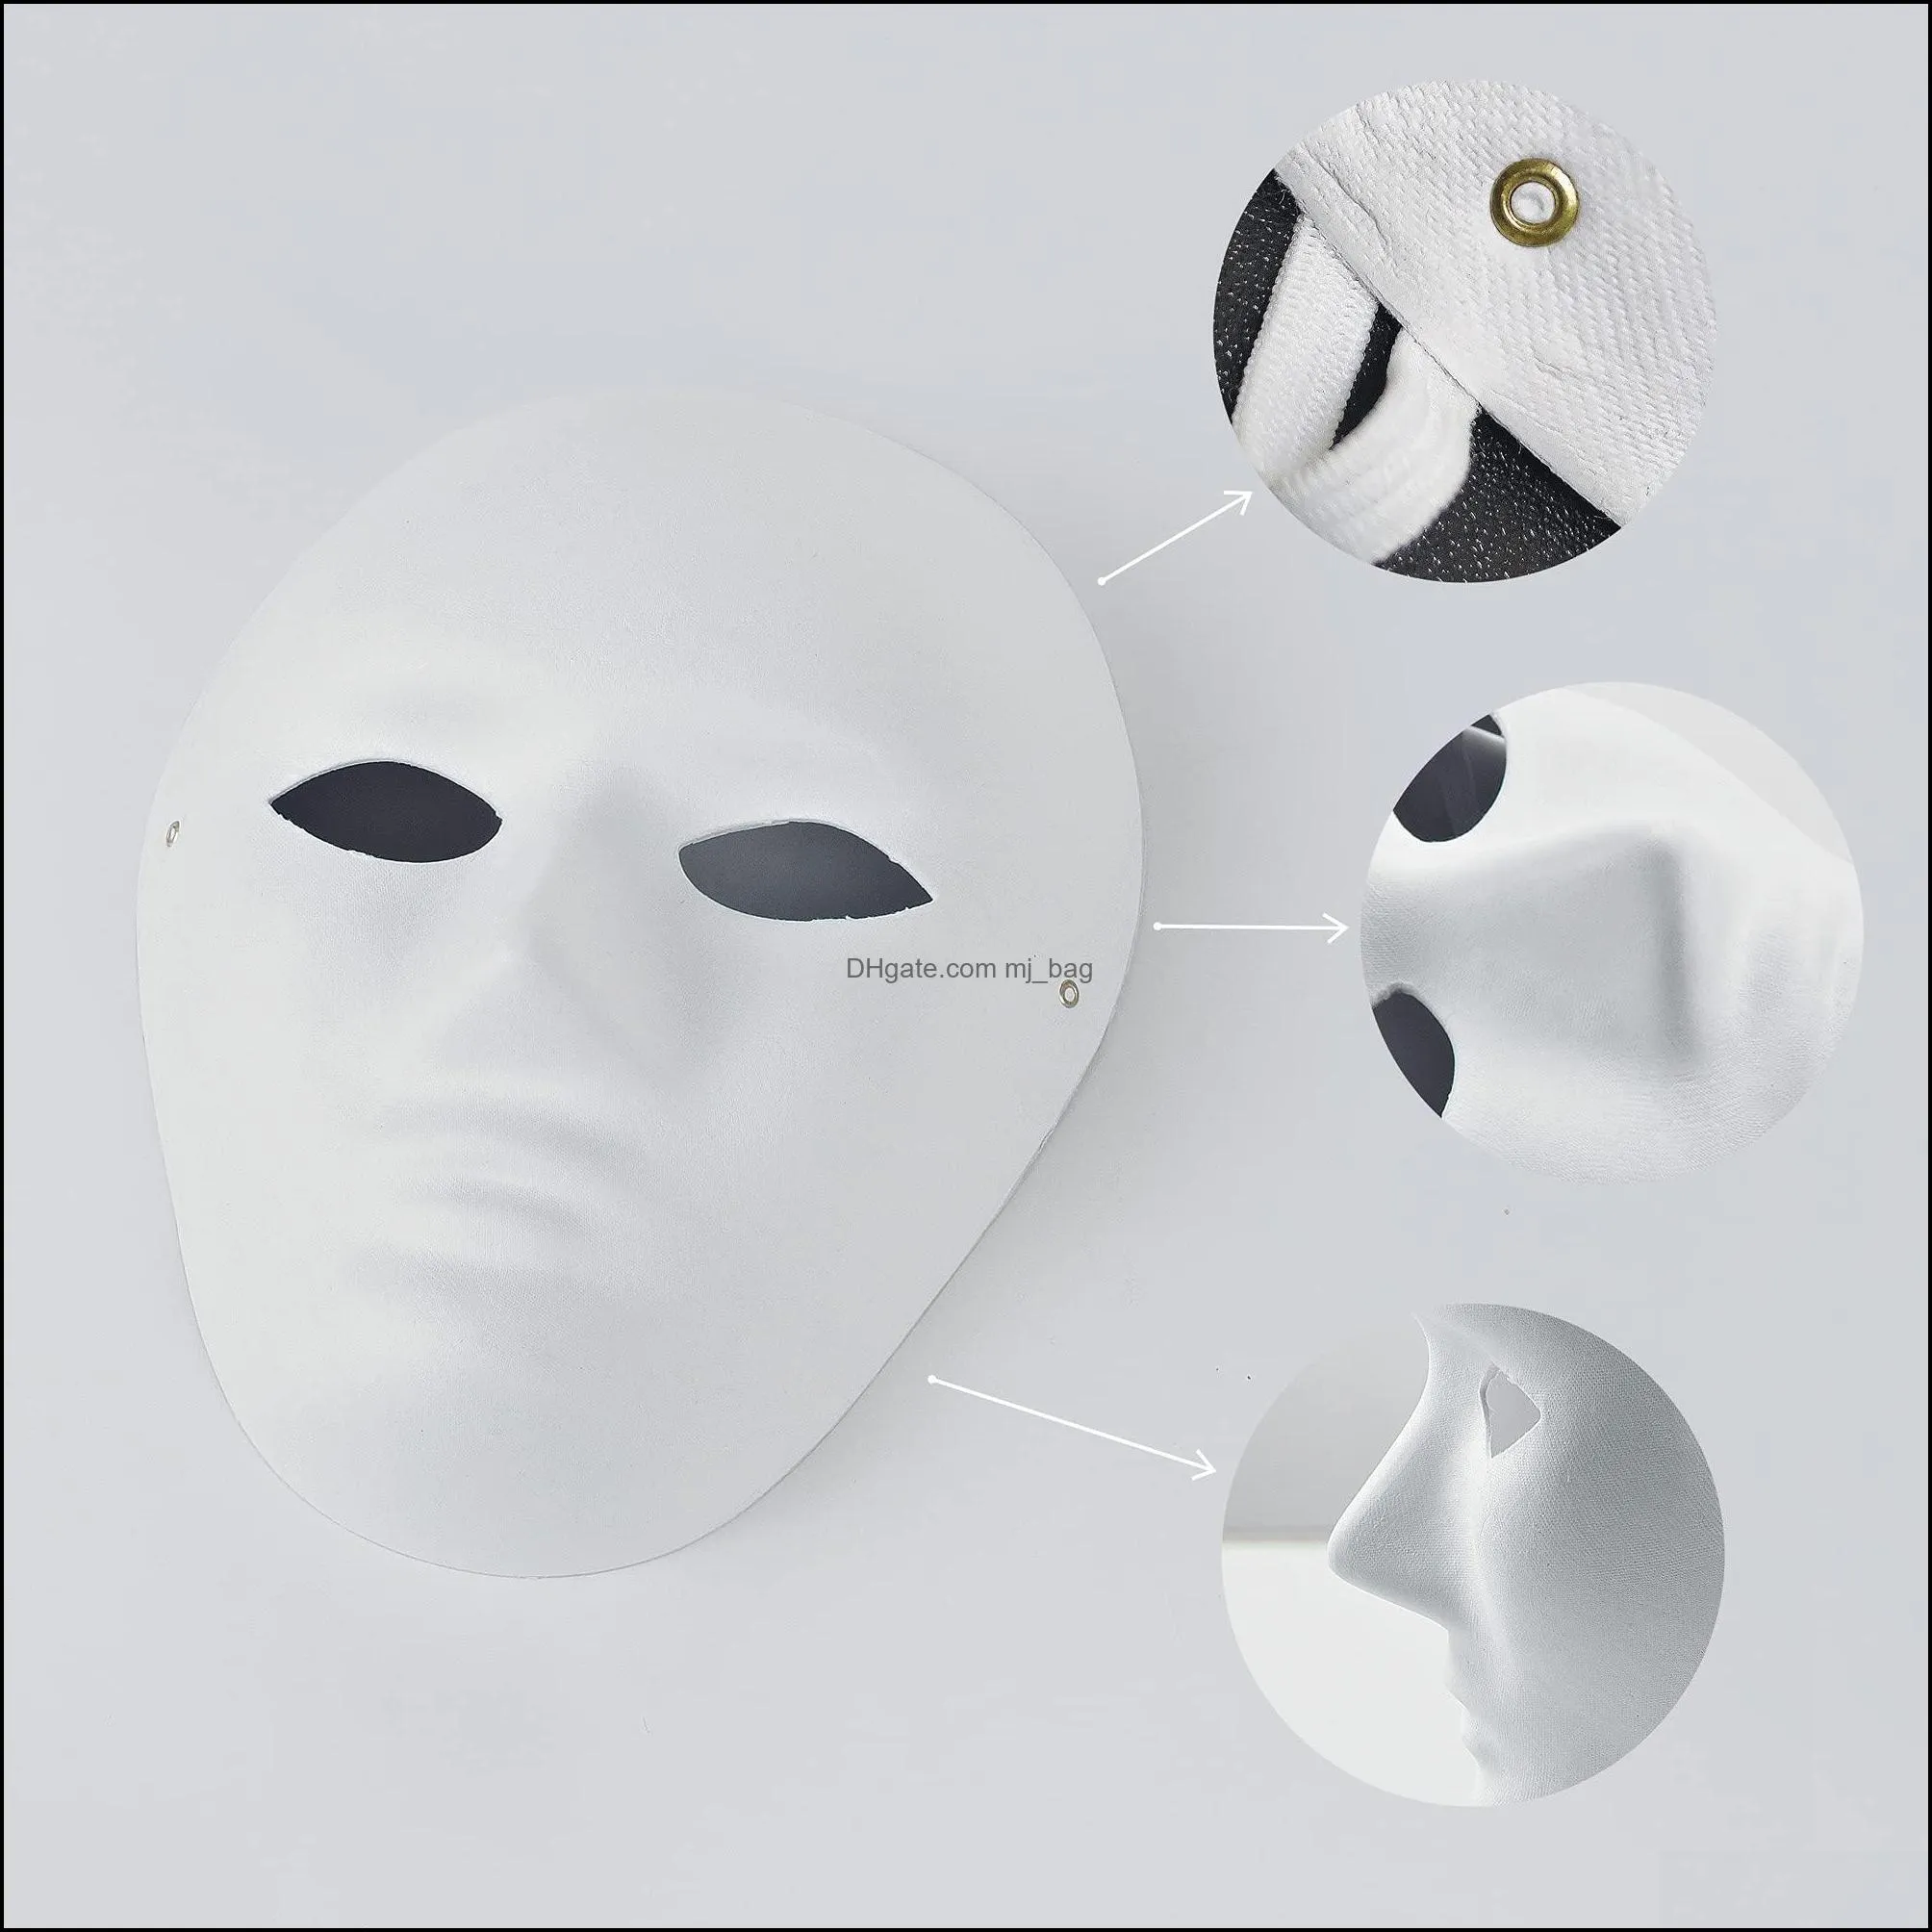 party masks oviseen paper he diy fl face white masquerade paintable mask for mardi gras cos-play halloween 9.45 x 7.28 inches amhbu